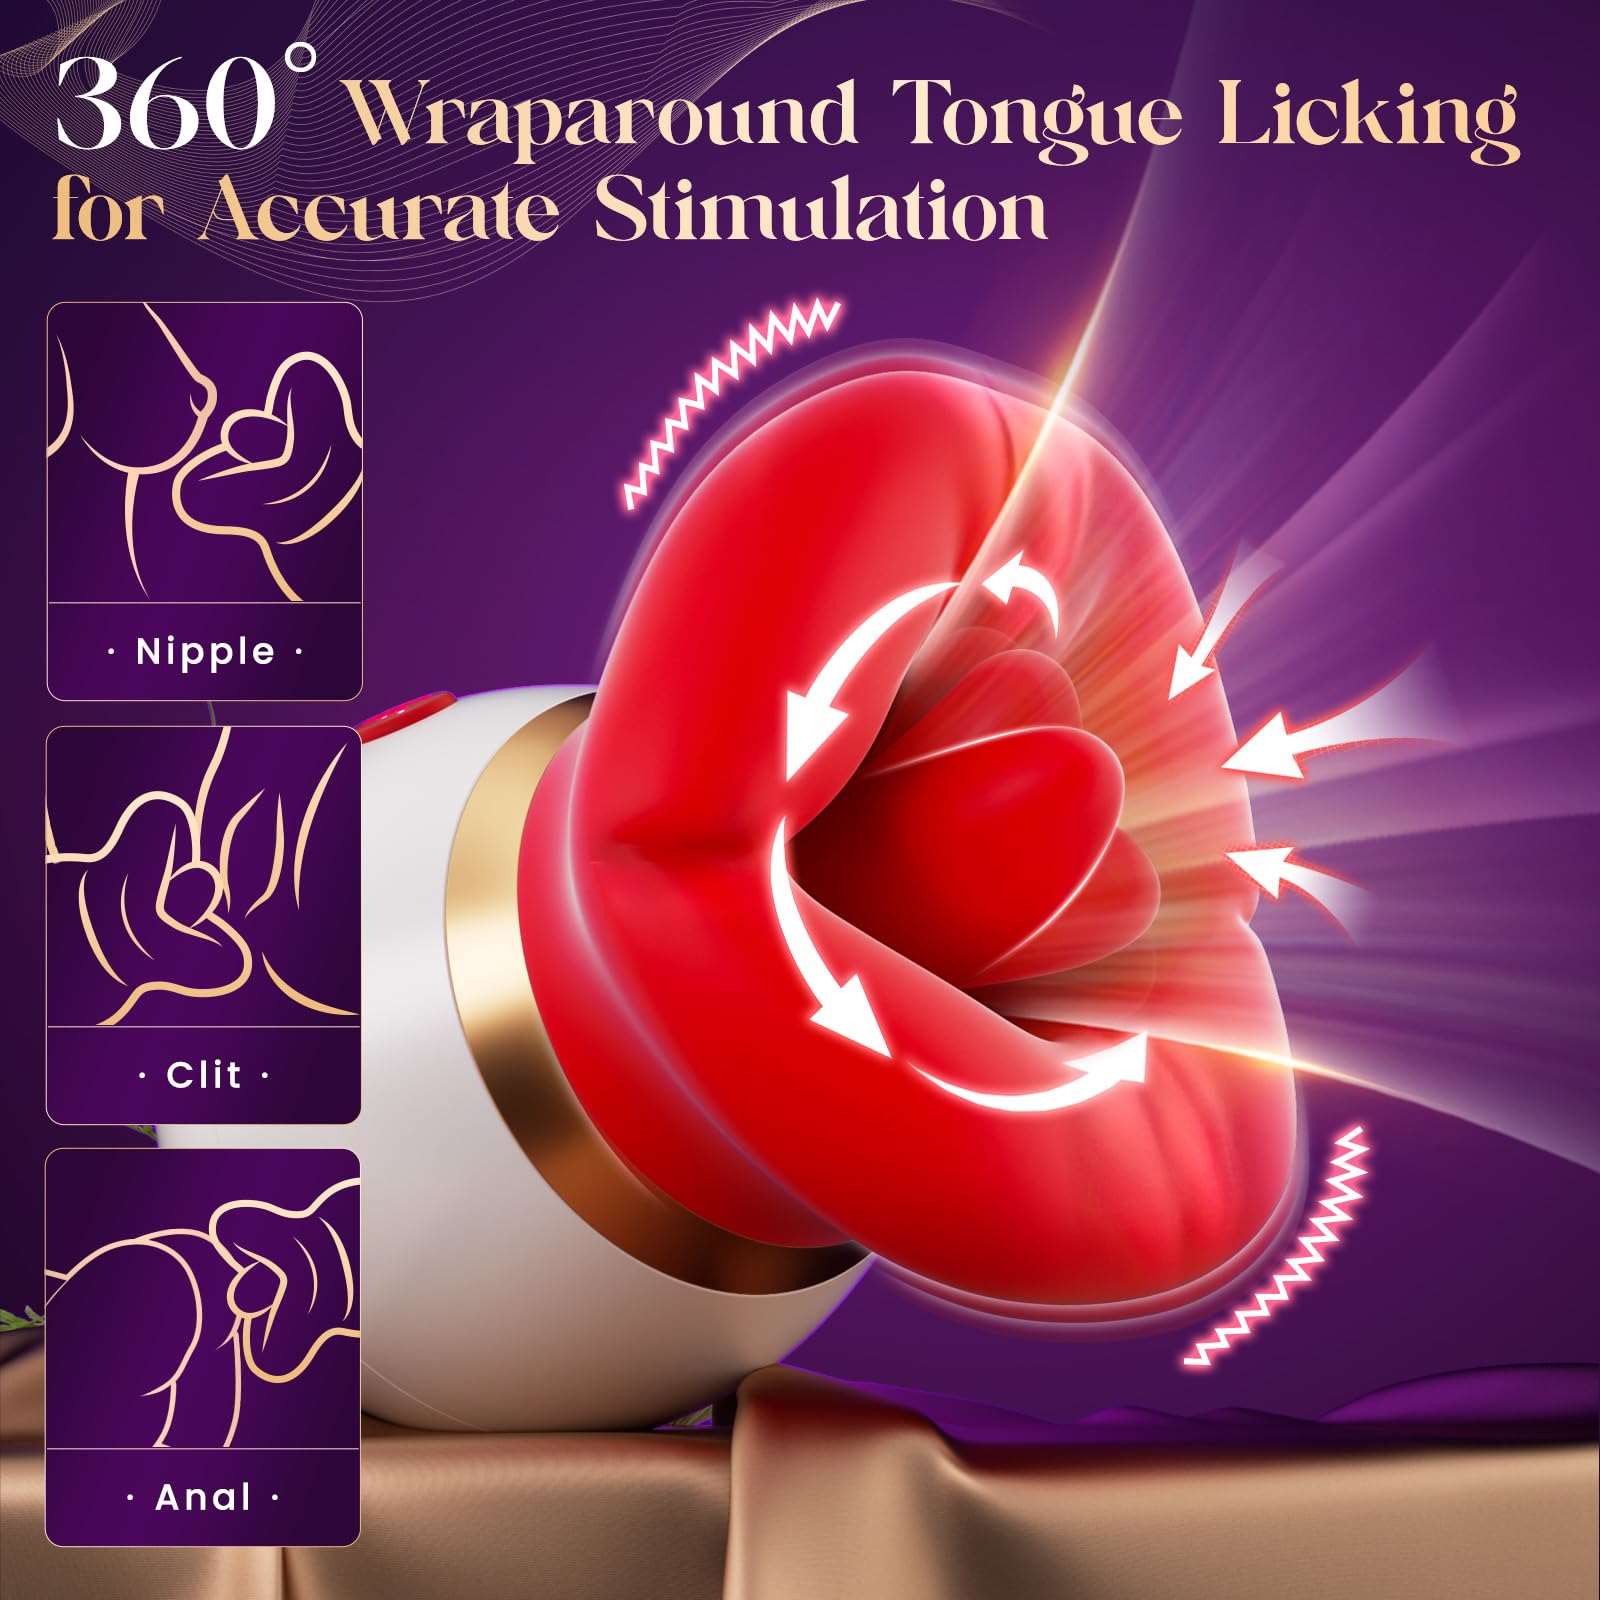 Sexeeg 3IN1 Big Mouth Shaped Sex Toy Sucking Vibrator Adult Toys